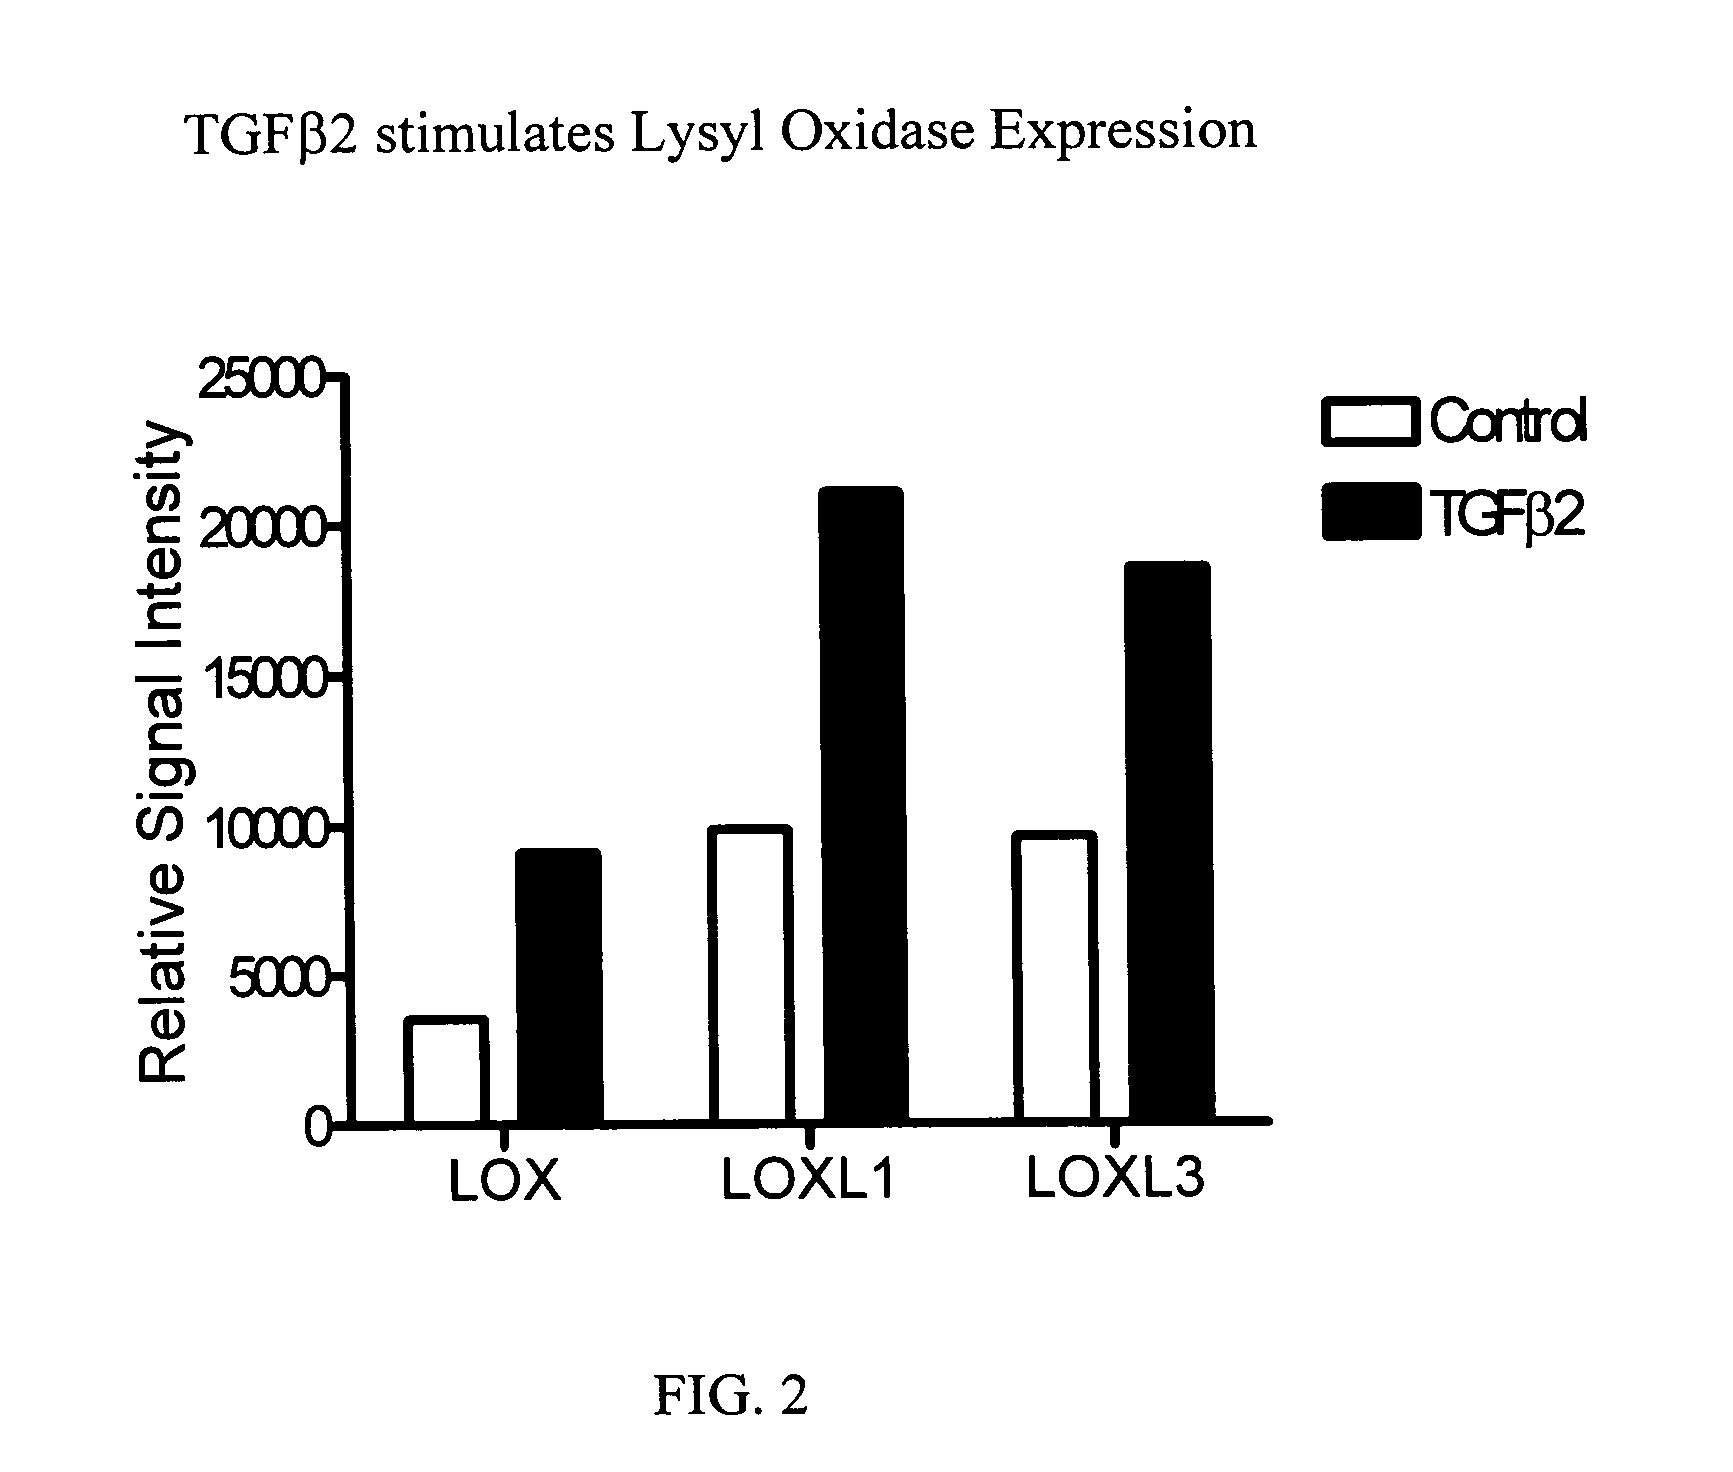 Agents which regulate, inhibit, or modulate the activity and/or expression of lysyl oxidase (LOX) and LOX-like proteases as a unique means to both lower intraocular pressure and treat glaucomatous retinopathies/optic neuropathies